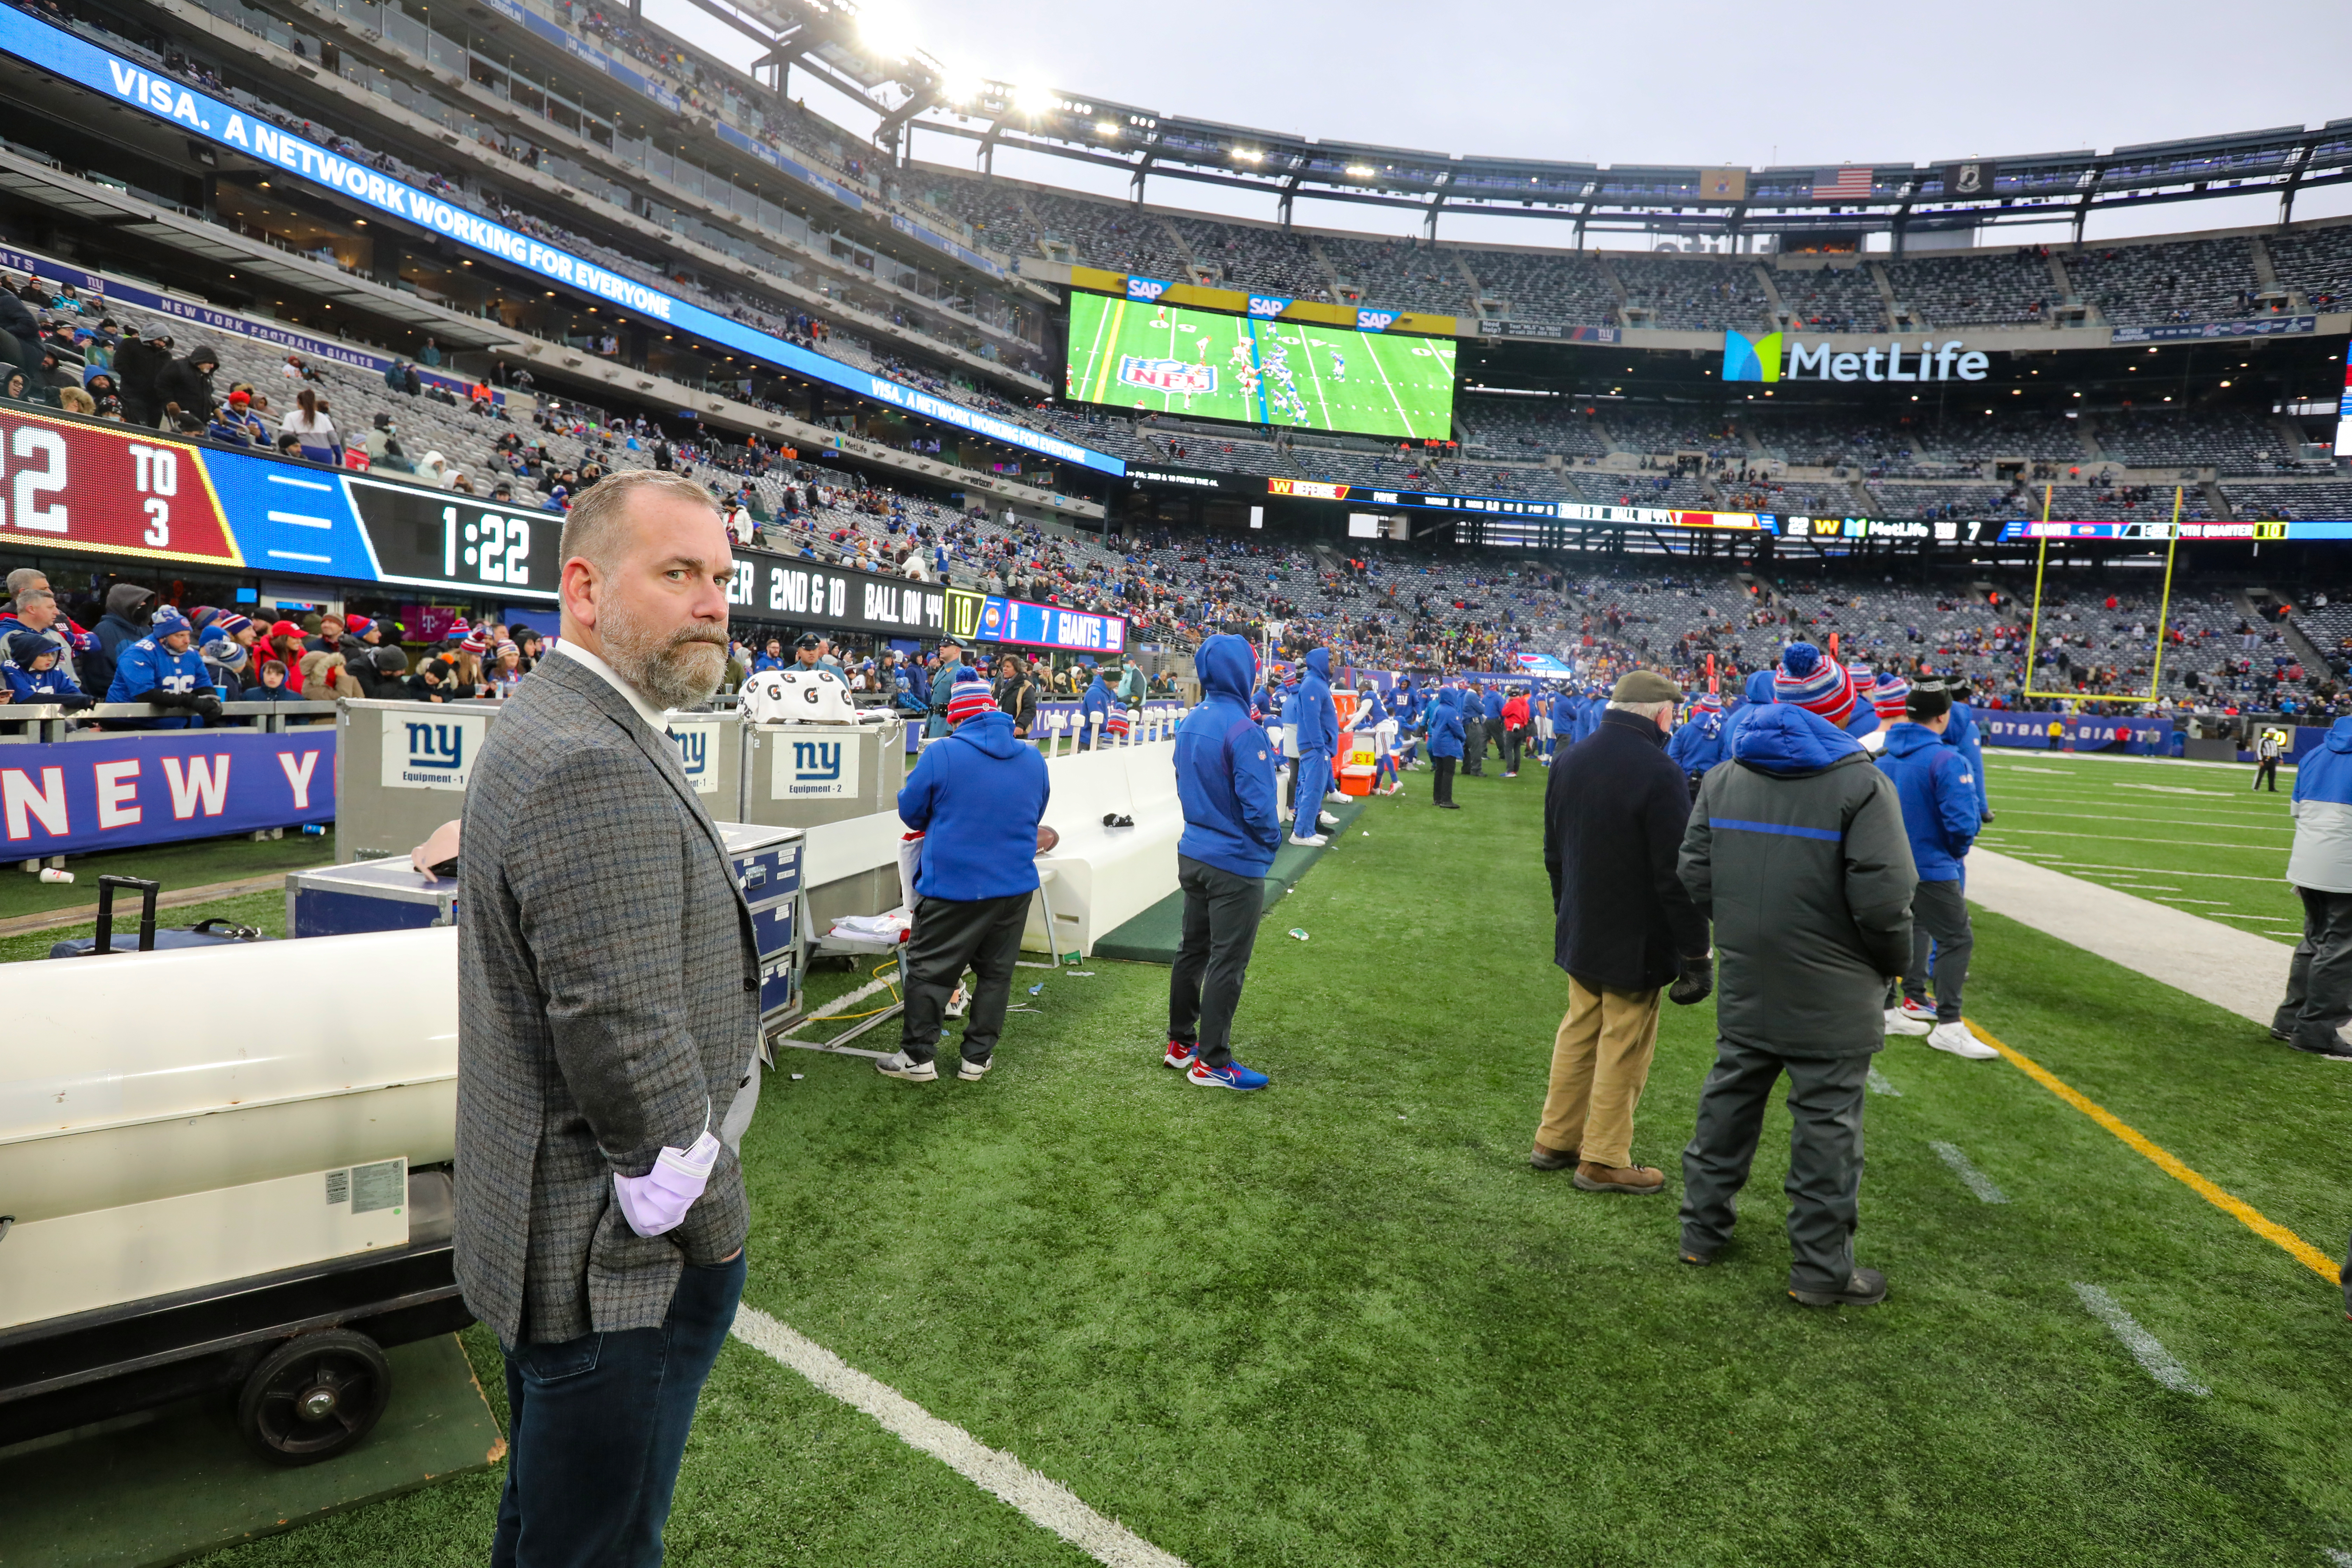 New York Giants assistant general manager Kevin Abrams on the Giants bench late in the fourth quarter as they lose to Washington Football Team, 22-7, on Sunday, Jan. 9, 2022 in East Rutherford, N.J.